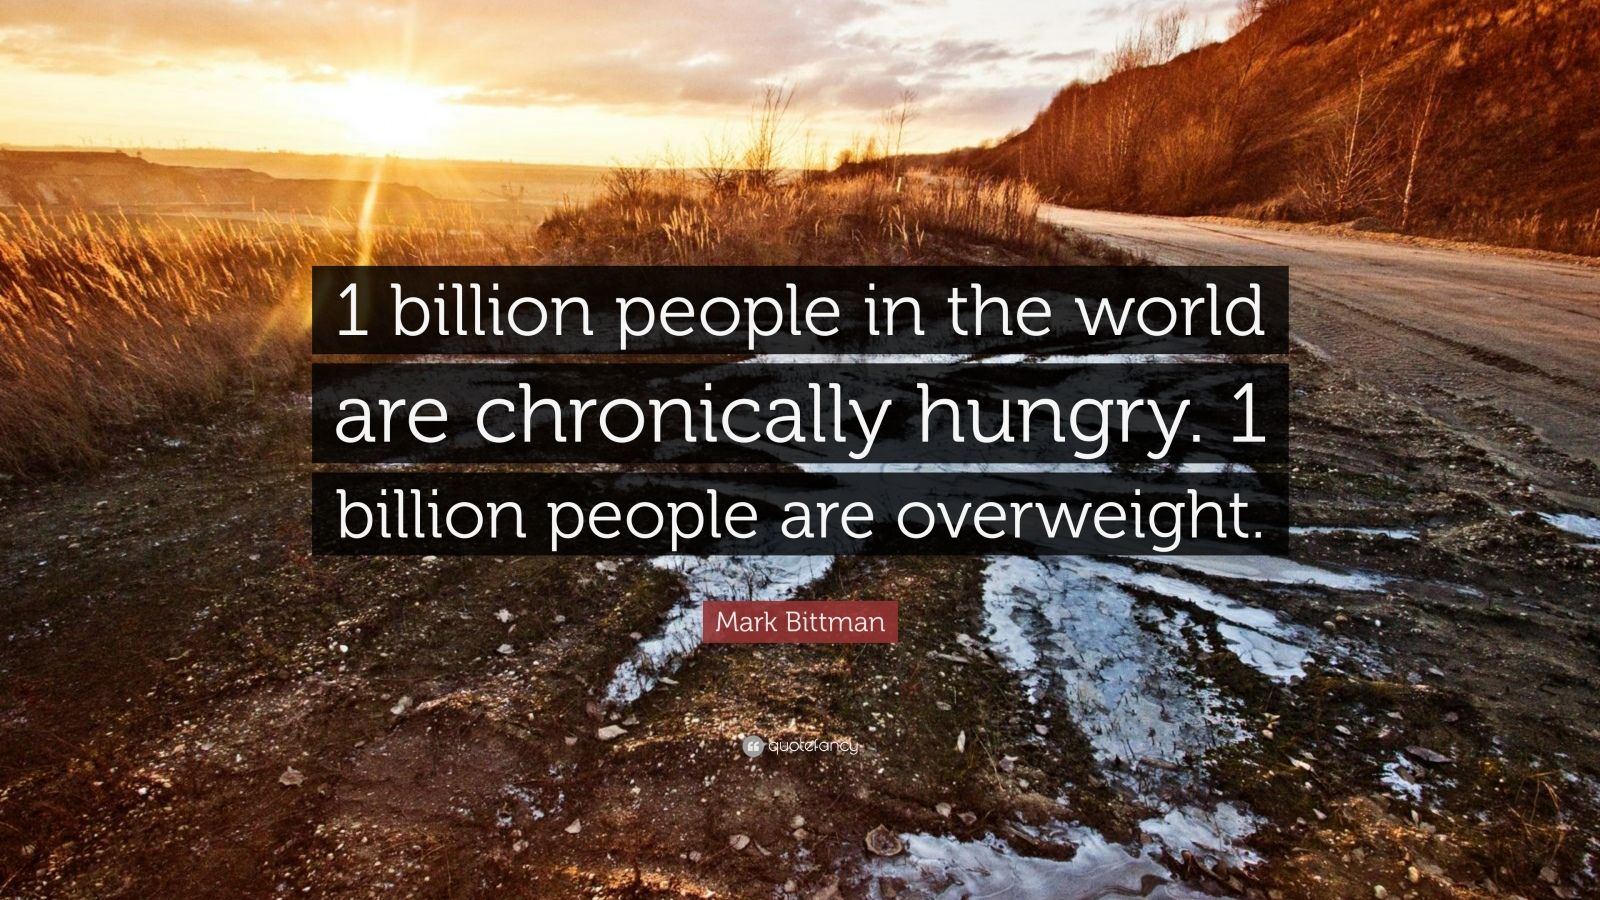 Mark Bittman Quote “1 Billion People In The World Are Chronically Hungry 1 Billion People Are